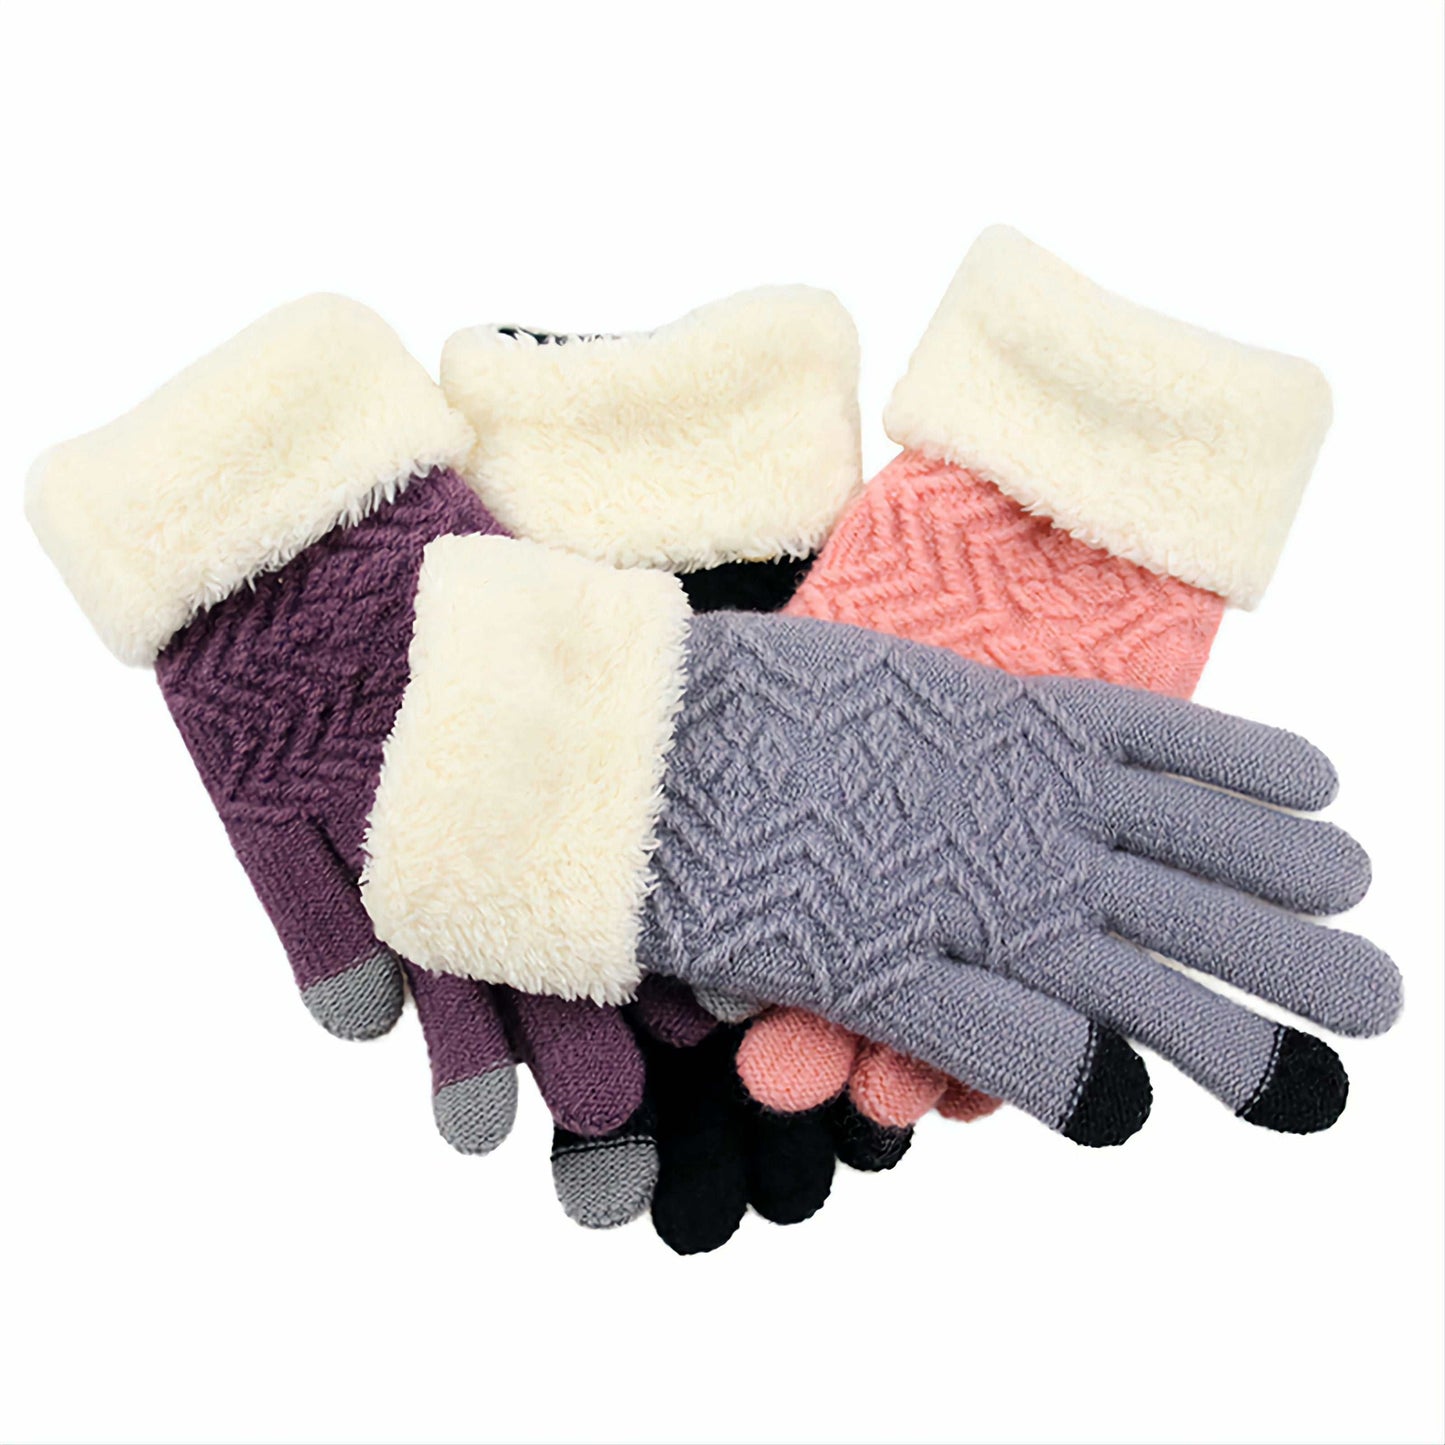 Jacquard Knitted Warm winter Gloves for Women